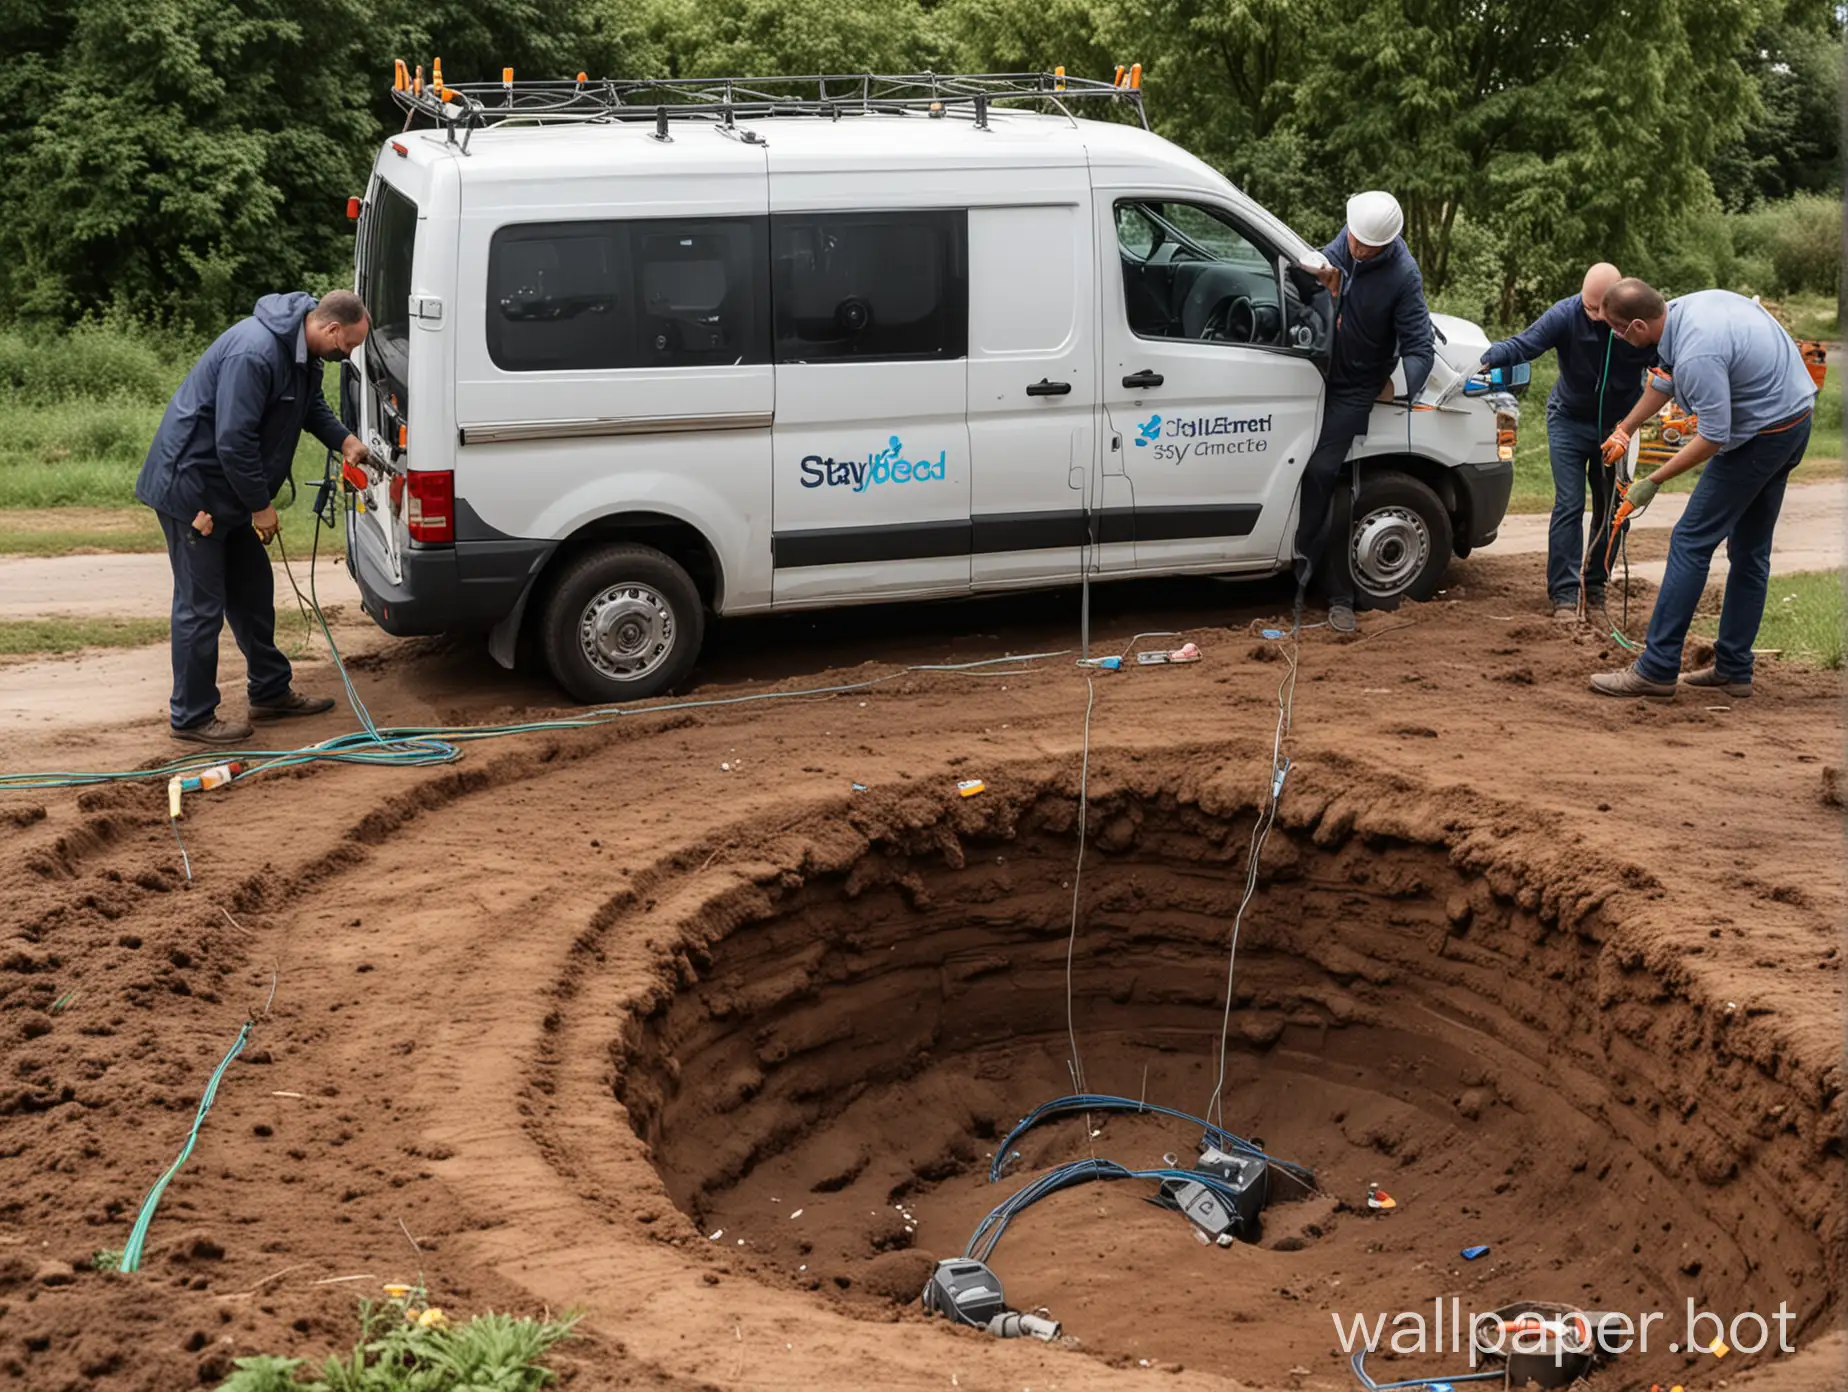 a van with "stay connected" on it, two men are digging a hole in the ground and putting fiber optics in it